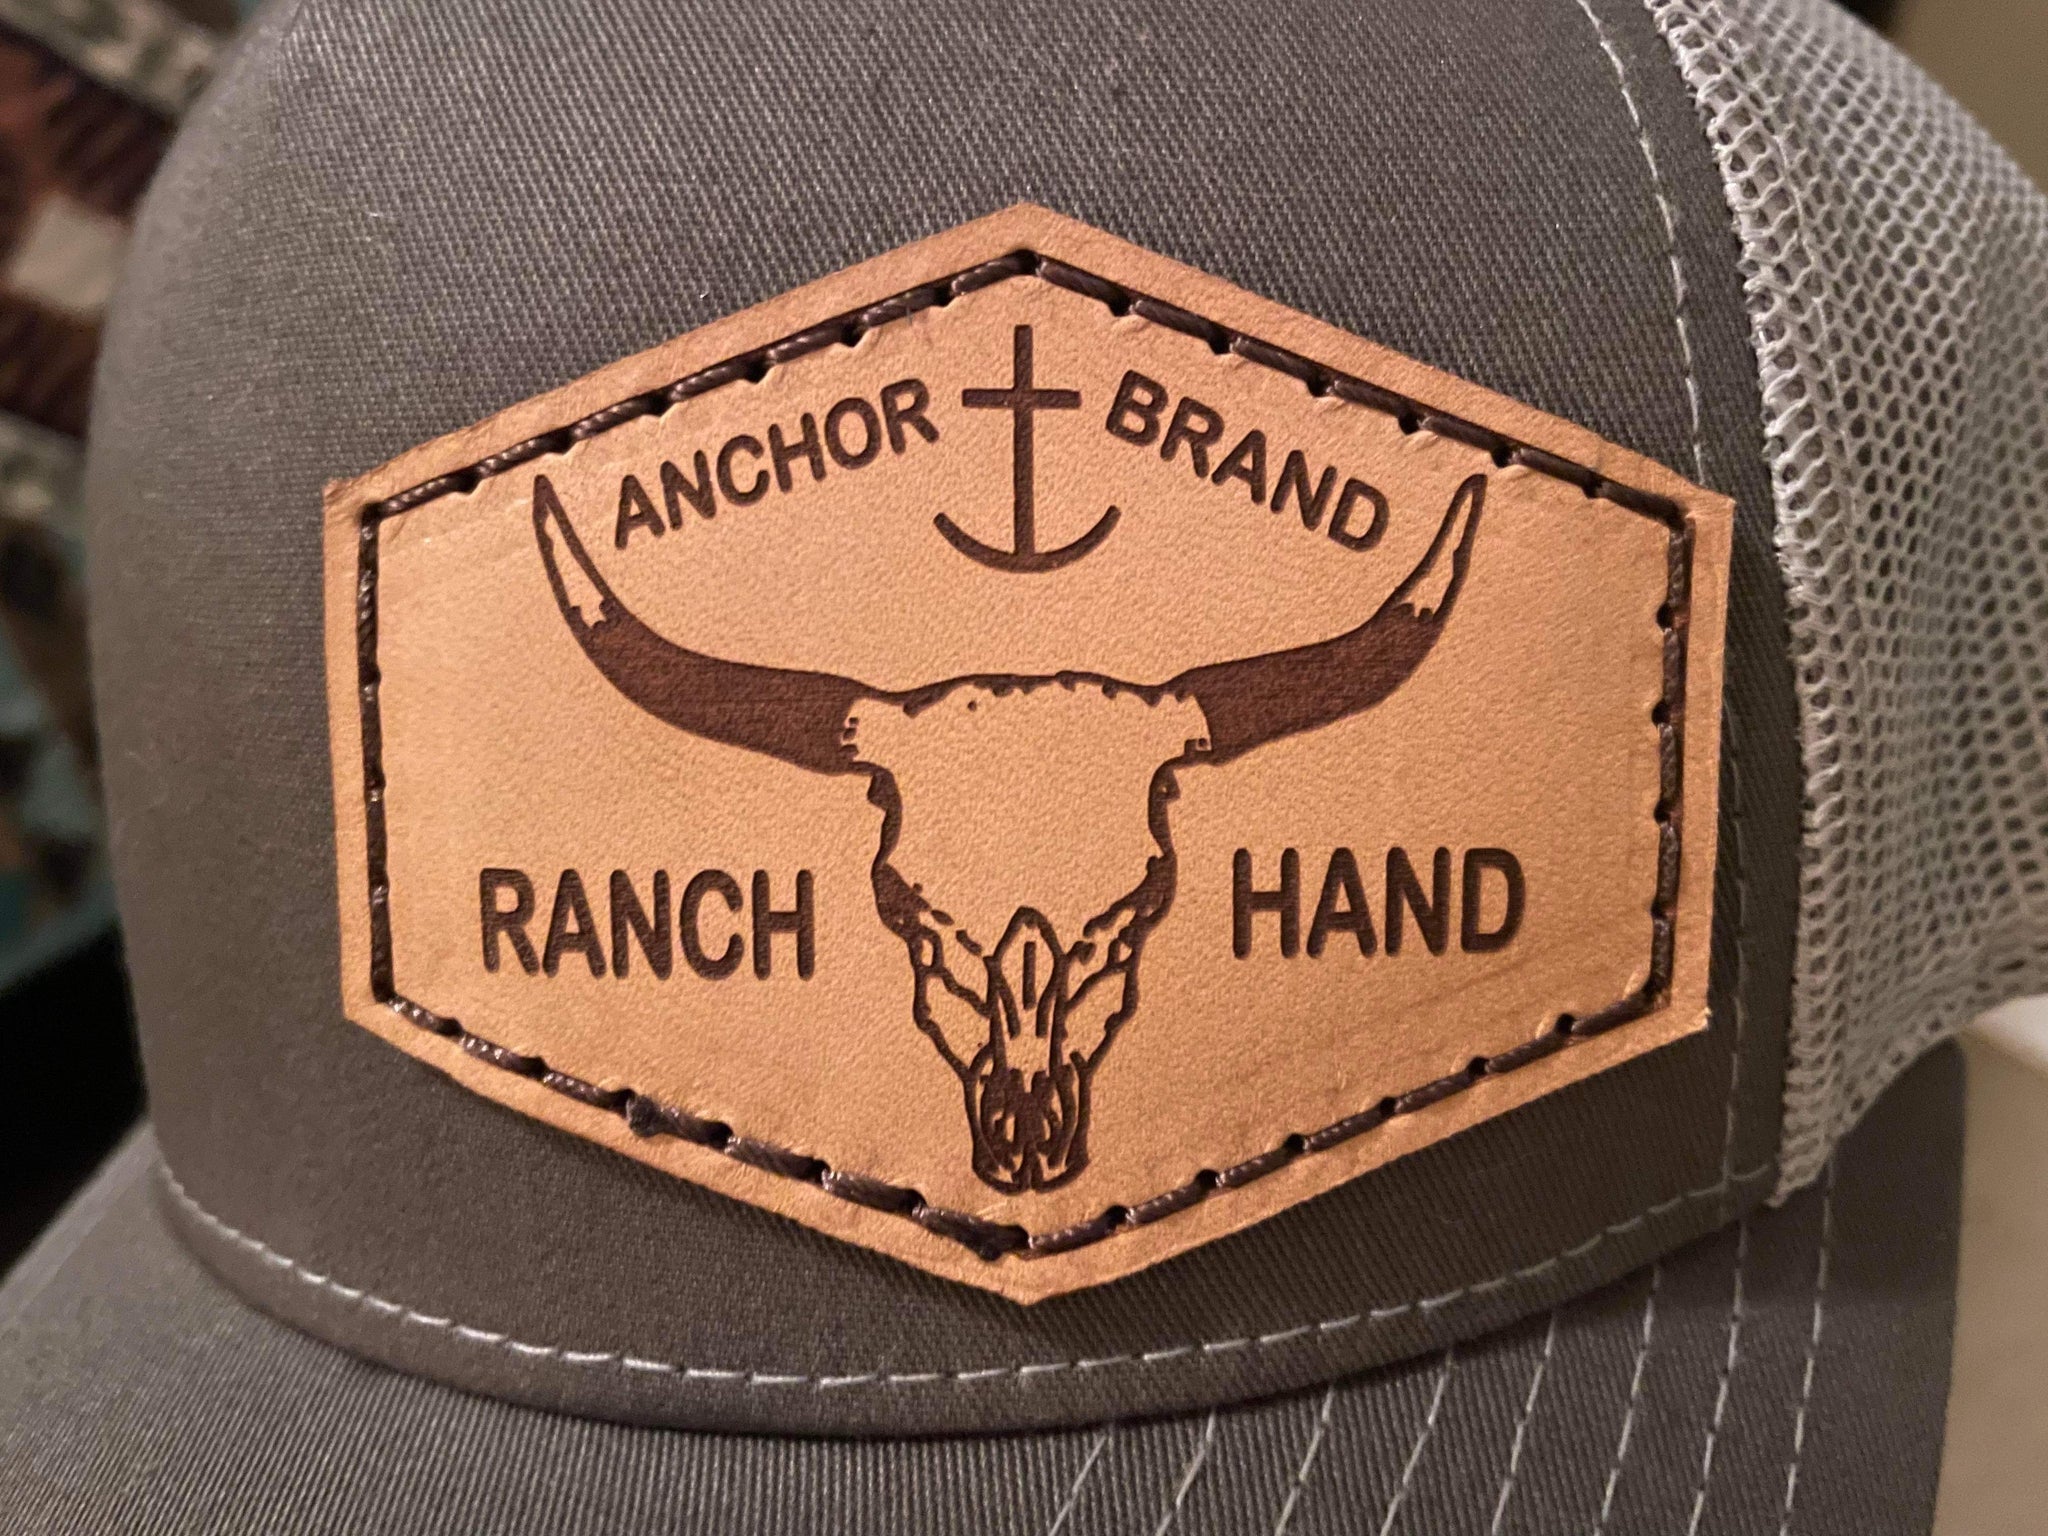 Anchor Brand Ranch Hand Leather Patch Hat